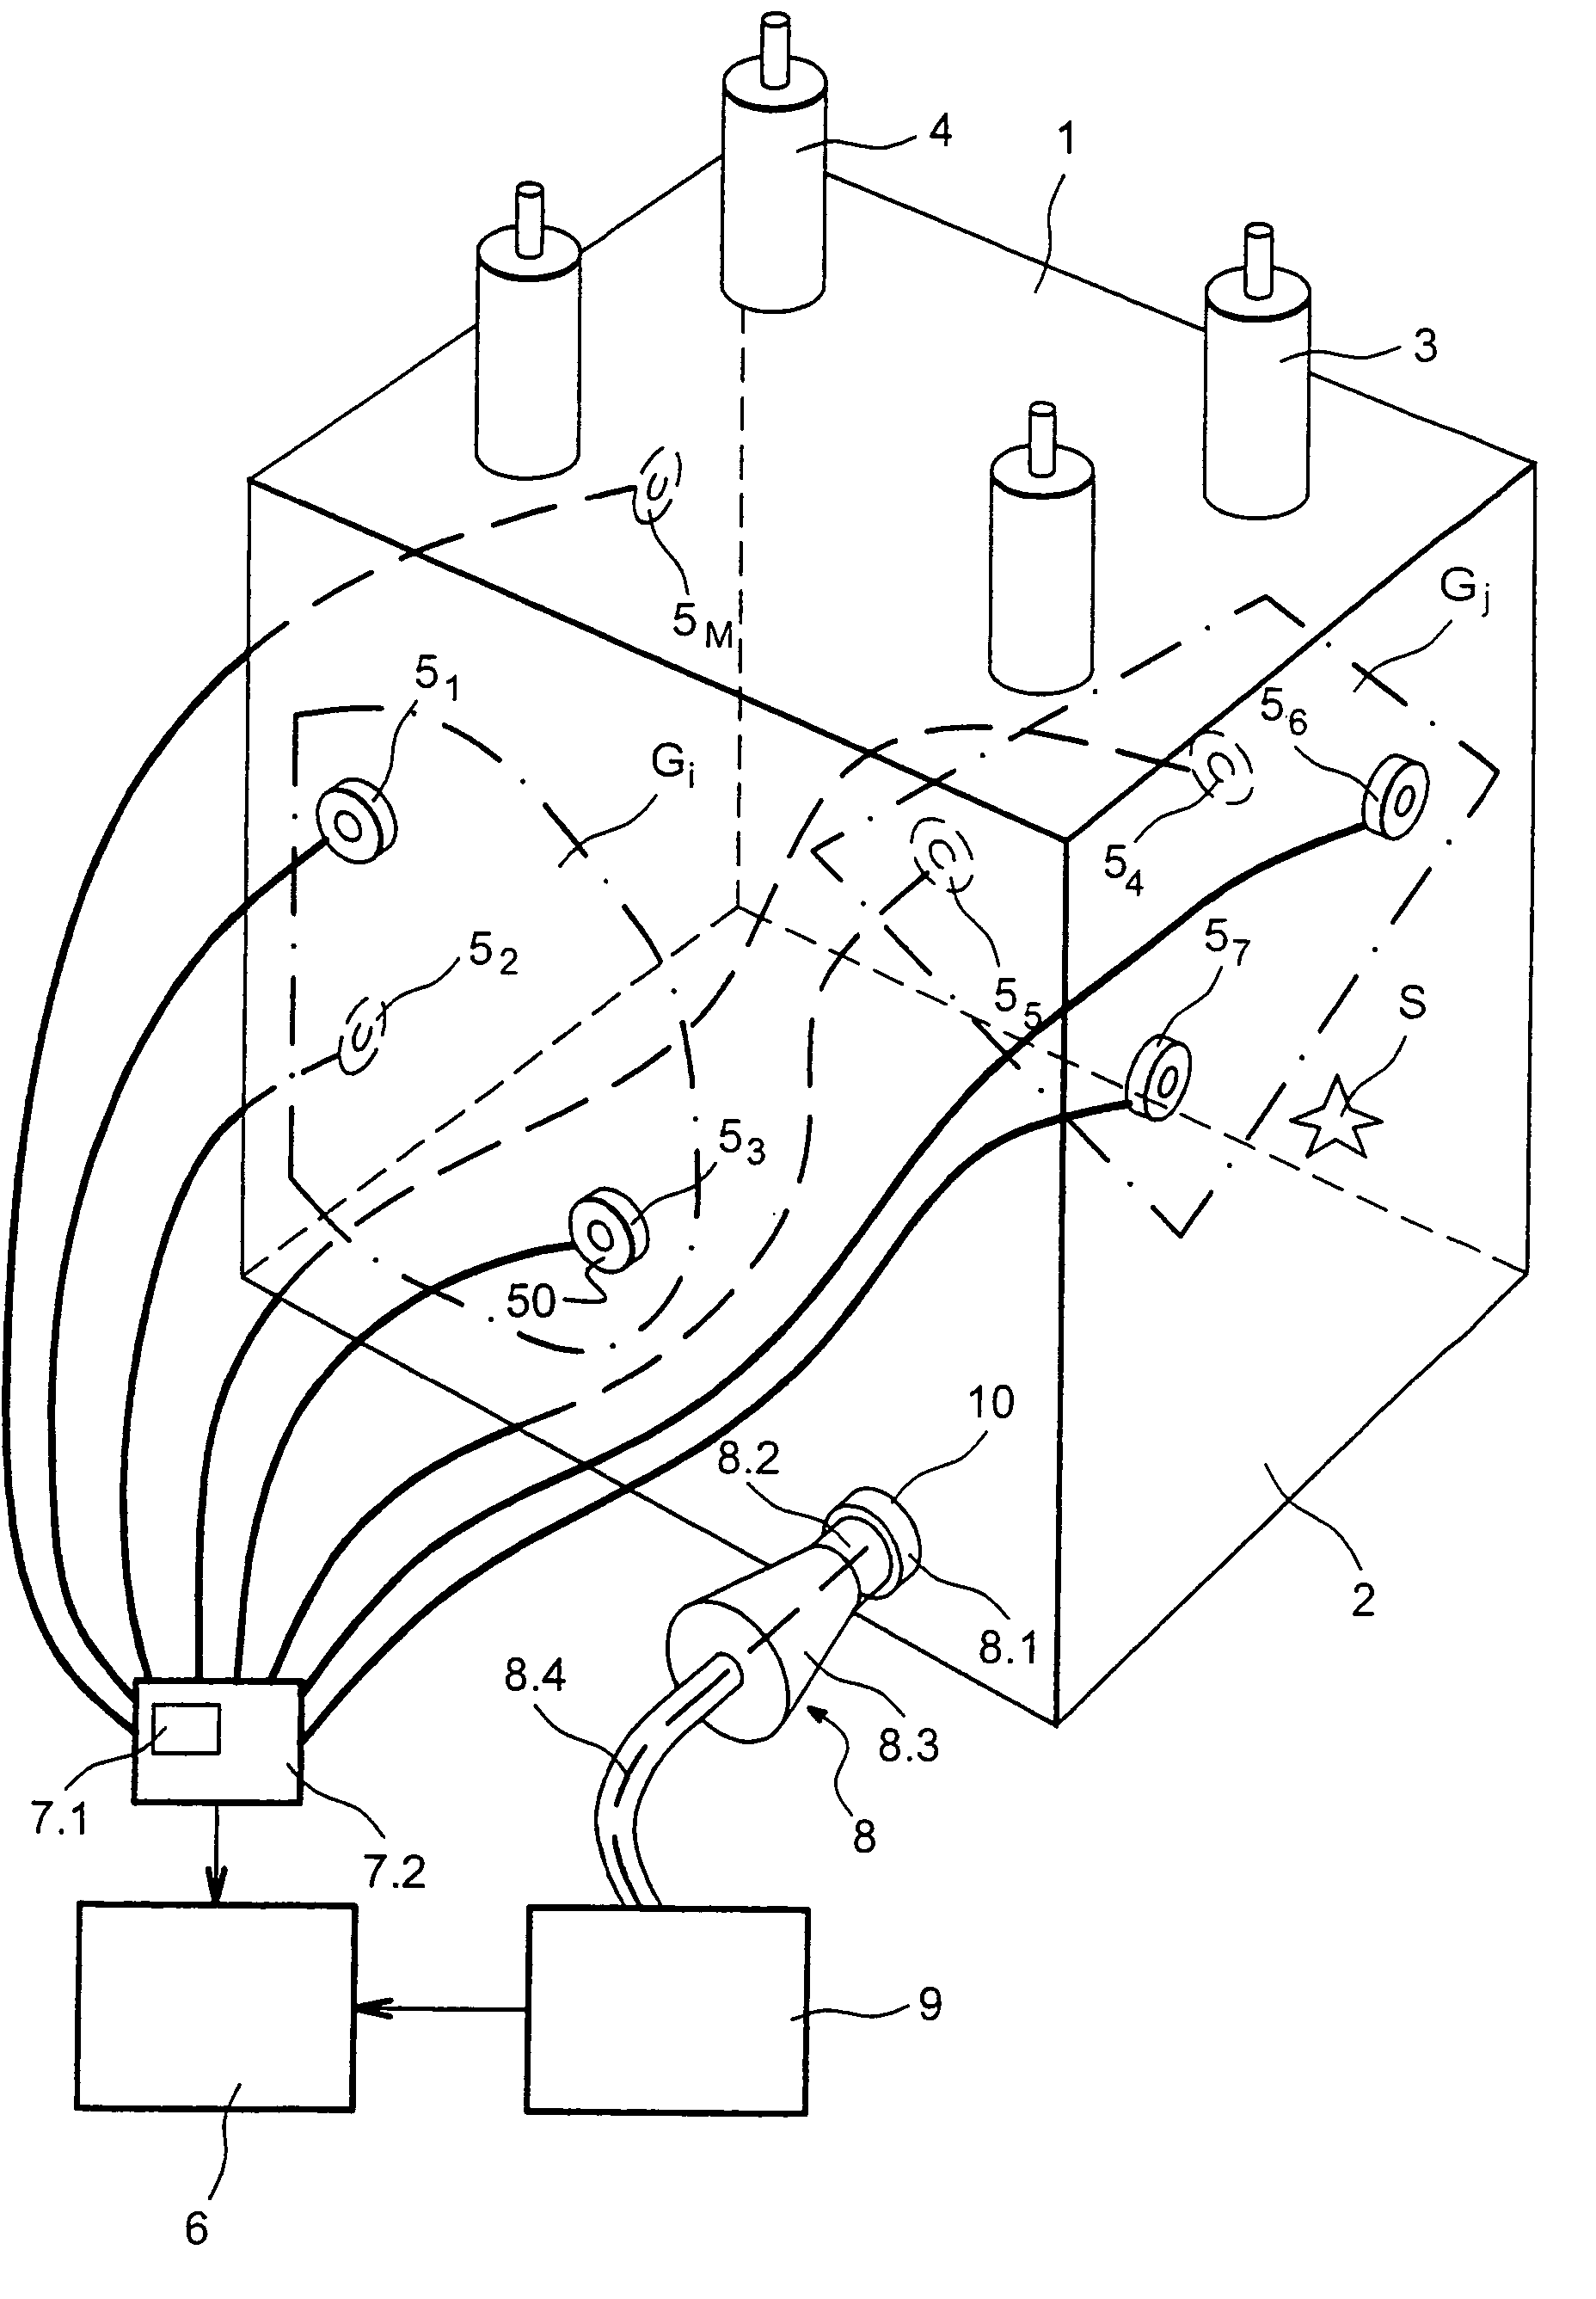 Method of detecting and locating a source of partial discharge in an electrical apparatus